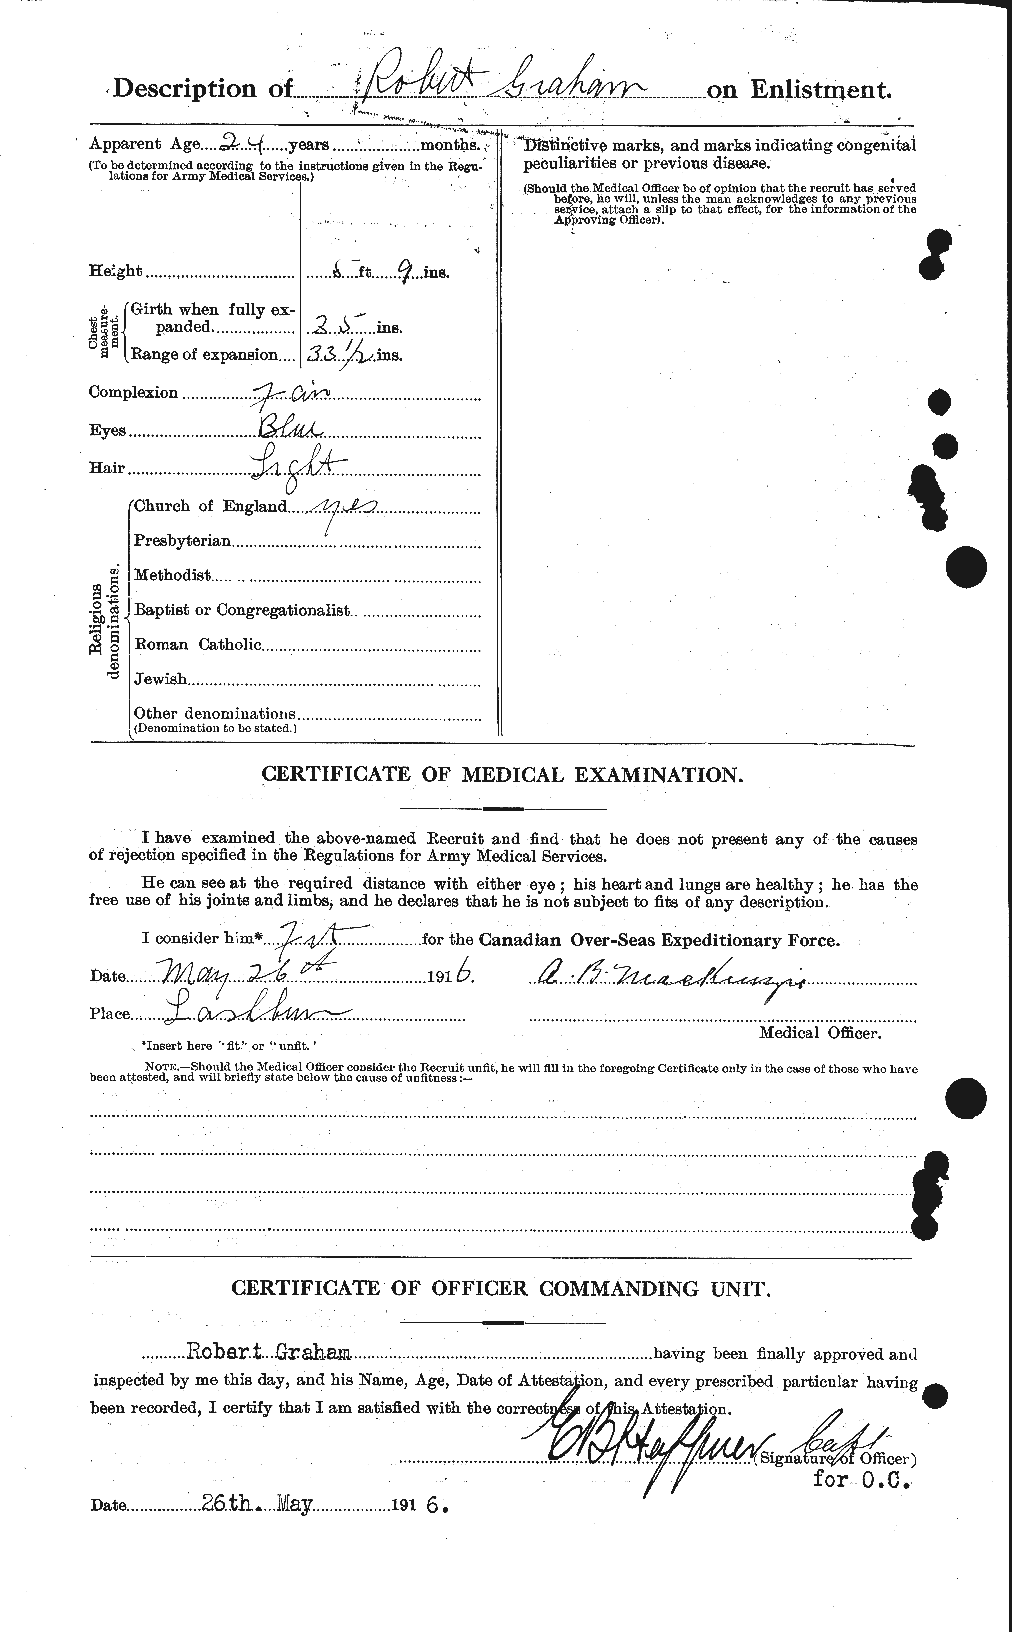 Personnel Records of the First World War - CEF 359387b